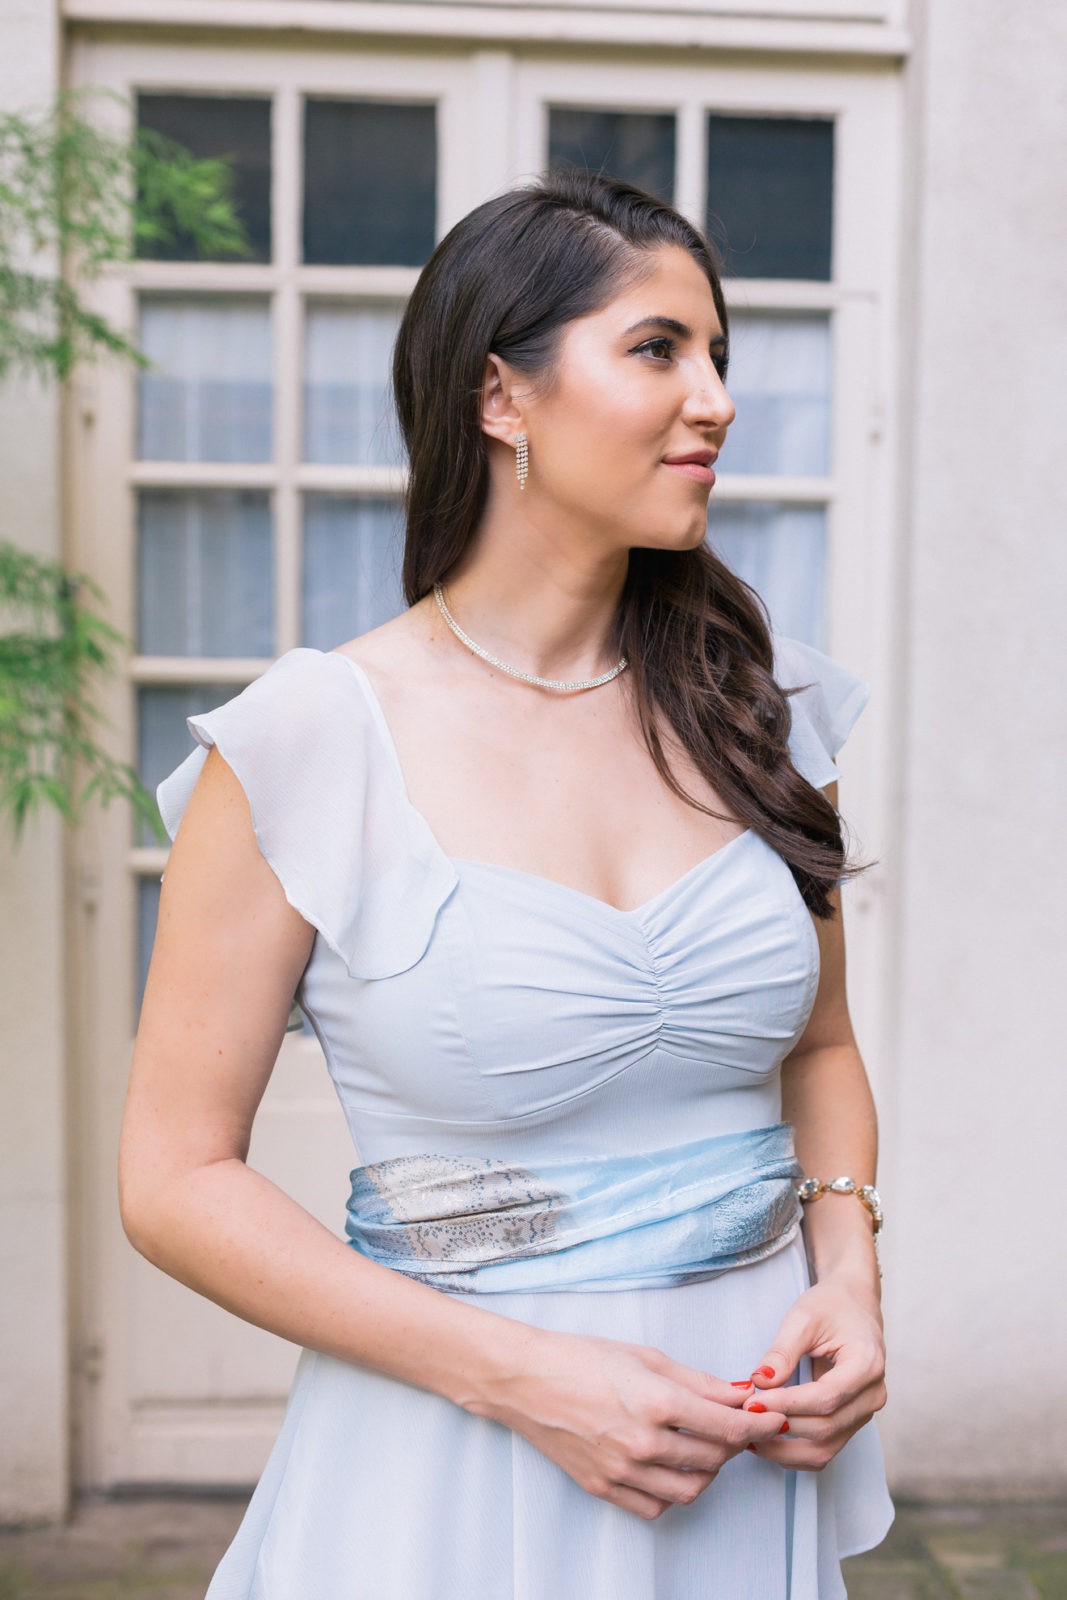 Bridal Jewelry for Your Big Day by popular Los Angeles Fashion Blogger Laura Lily